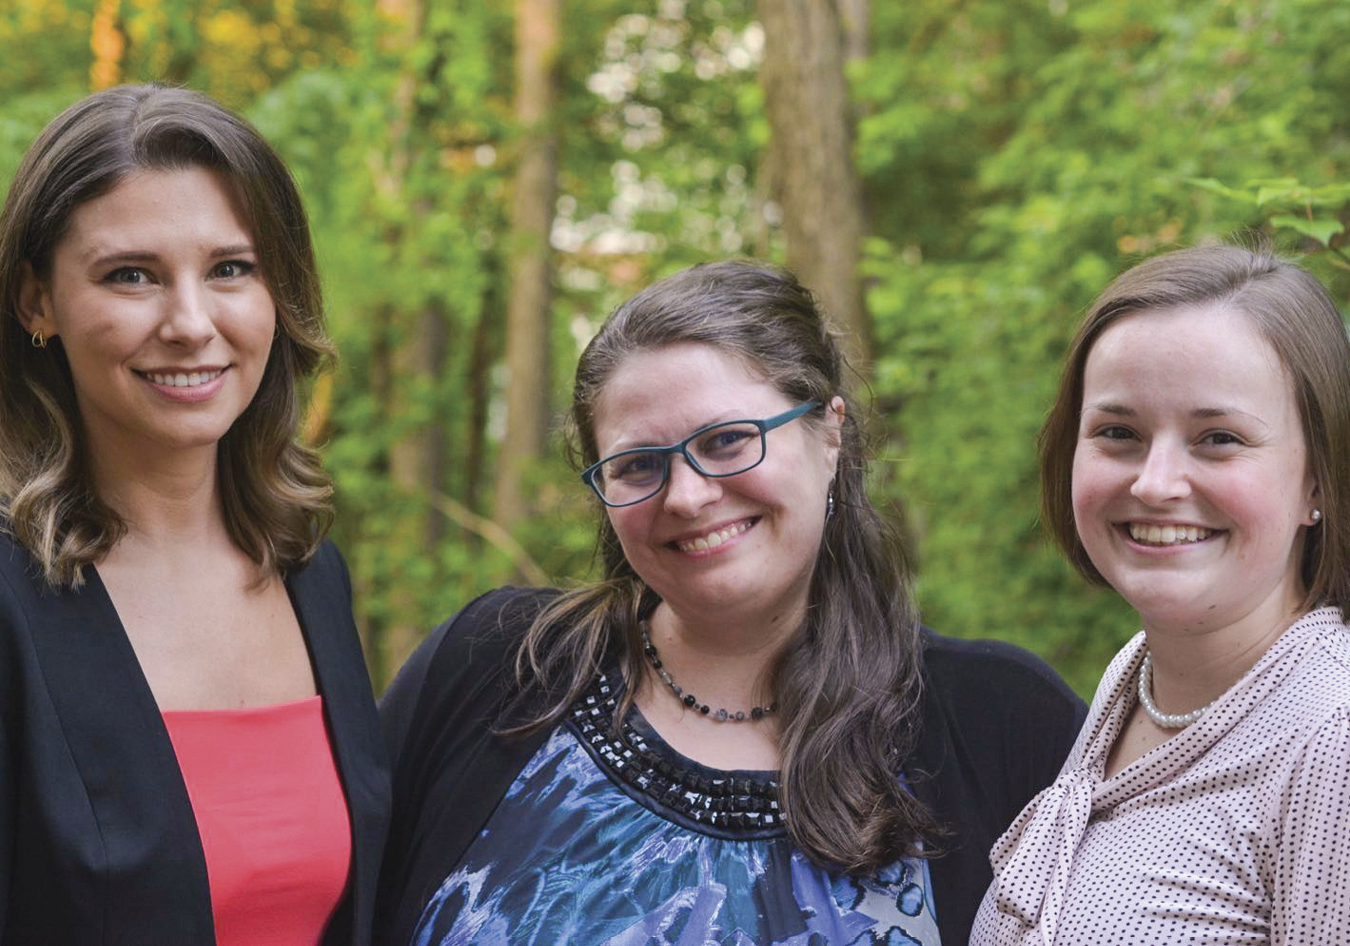 Three white women with brown hair smiling with forest behind them. Katherine is wearing a black blazer with salmon blouse, Amelia wears blue glasses and a blue top, Morgan wears a white blouse and pearl necklace